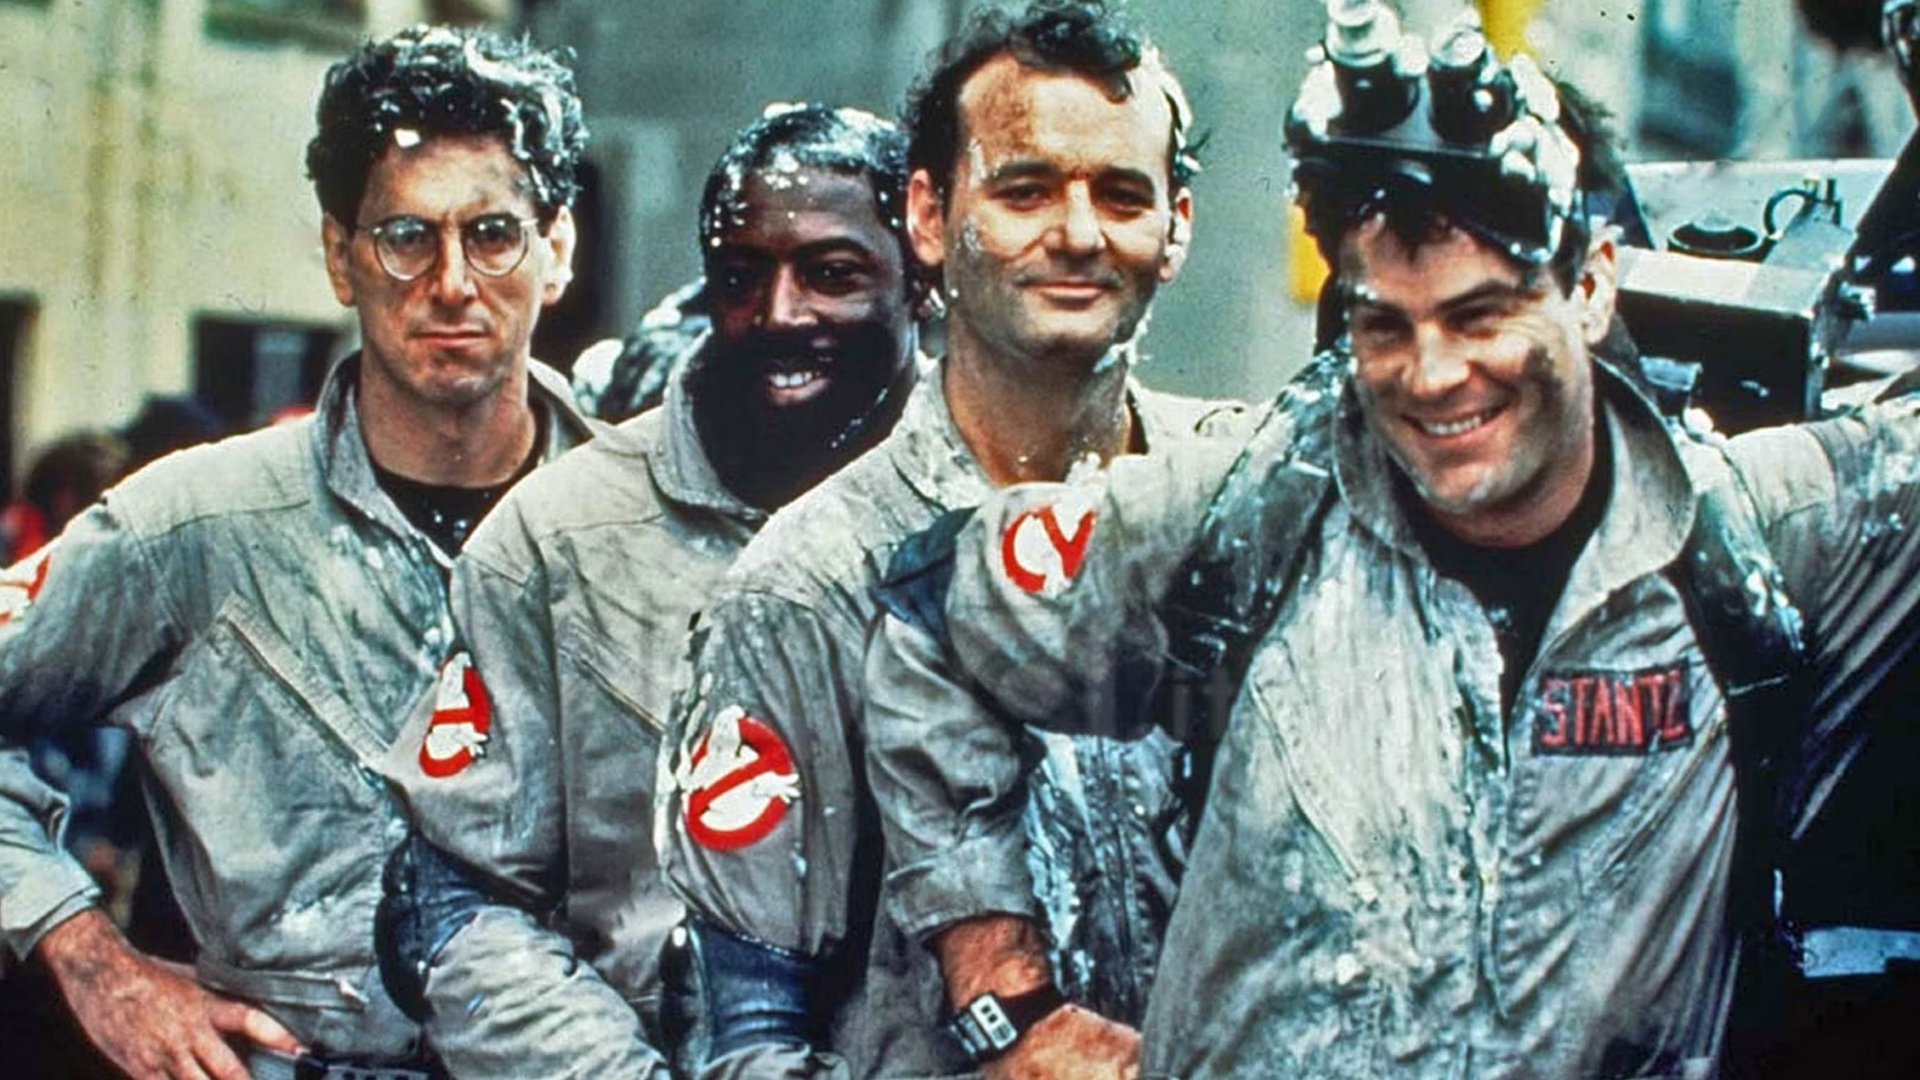 Enjoy This 1984 Behind-The-Scenes Making Of Video For The Original GHOSTBUSTERS Movie